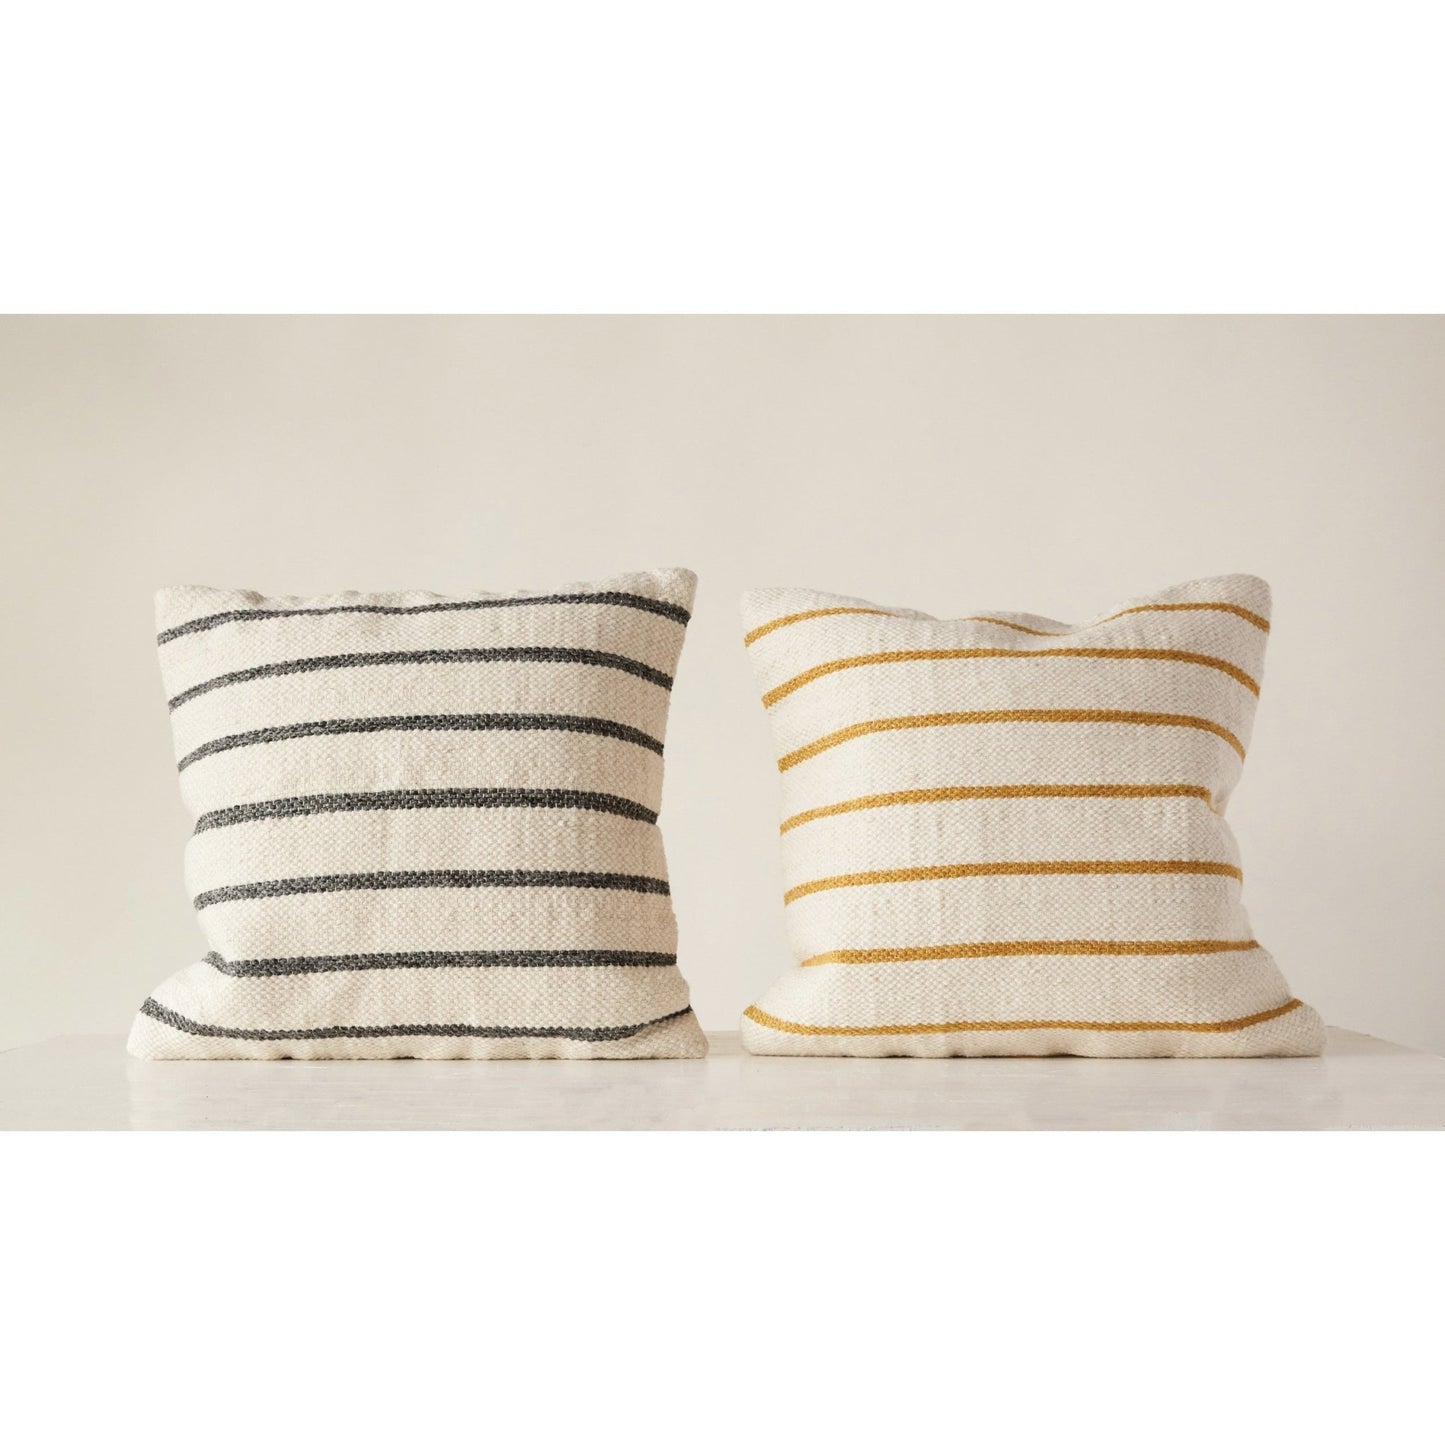 Asst Woven Striped Pillow - The Riviera Towel Company